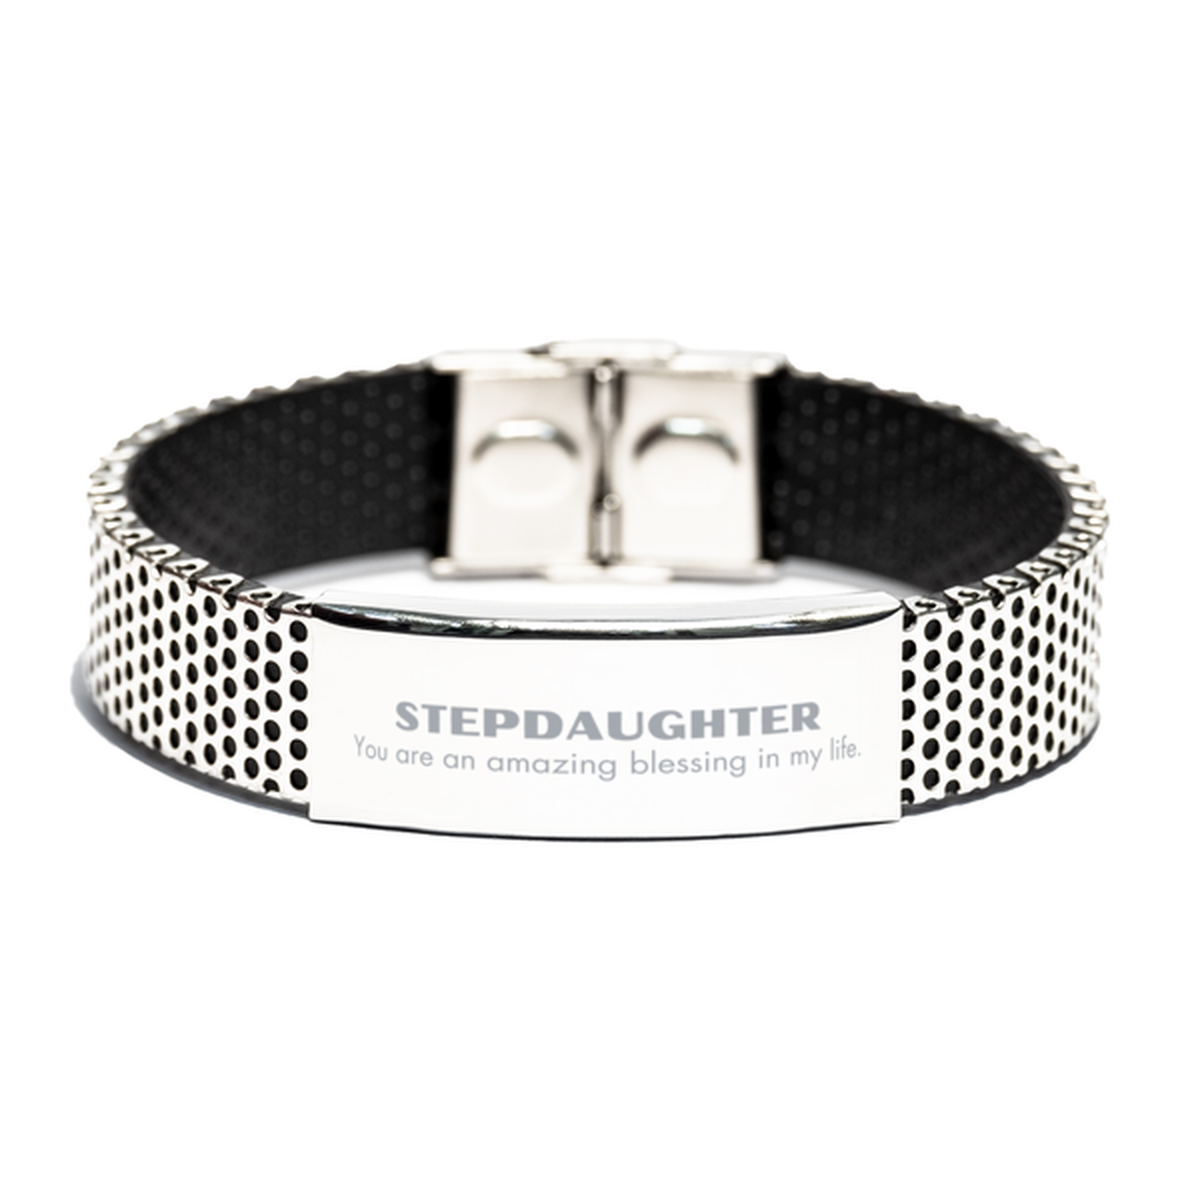 Stepdaughter Stainless Steel Bracelet, You are an amazing blessing in my life, Thank You Gifts For Stepdaughter, Inspirational Birthday Christmas Unique Gifts For Stepdaughter